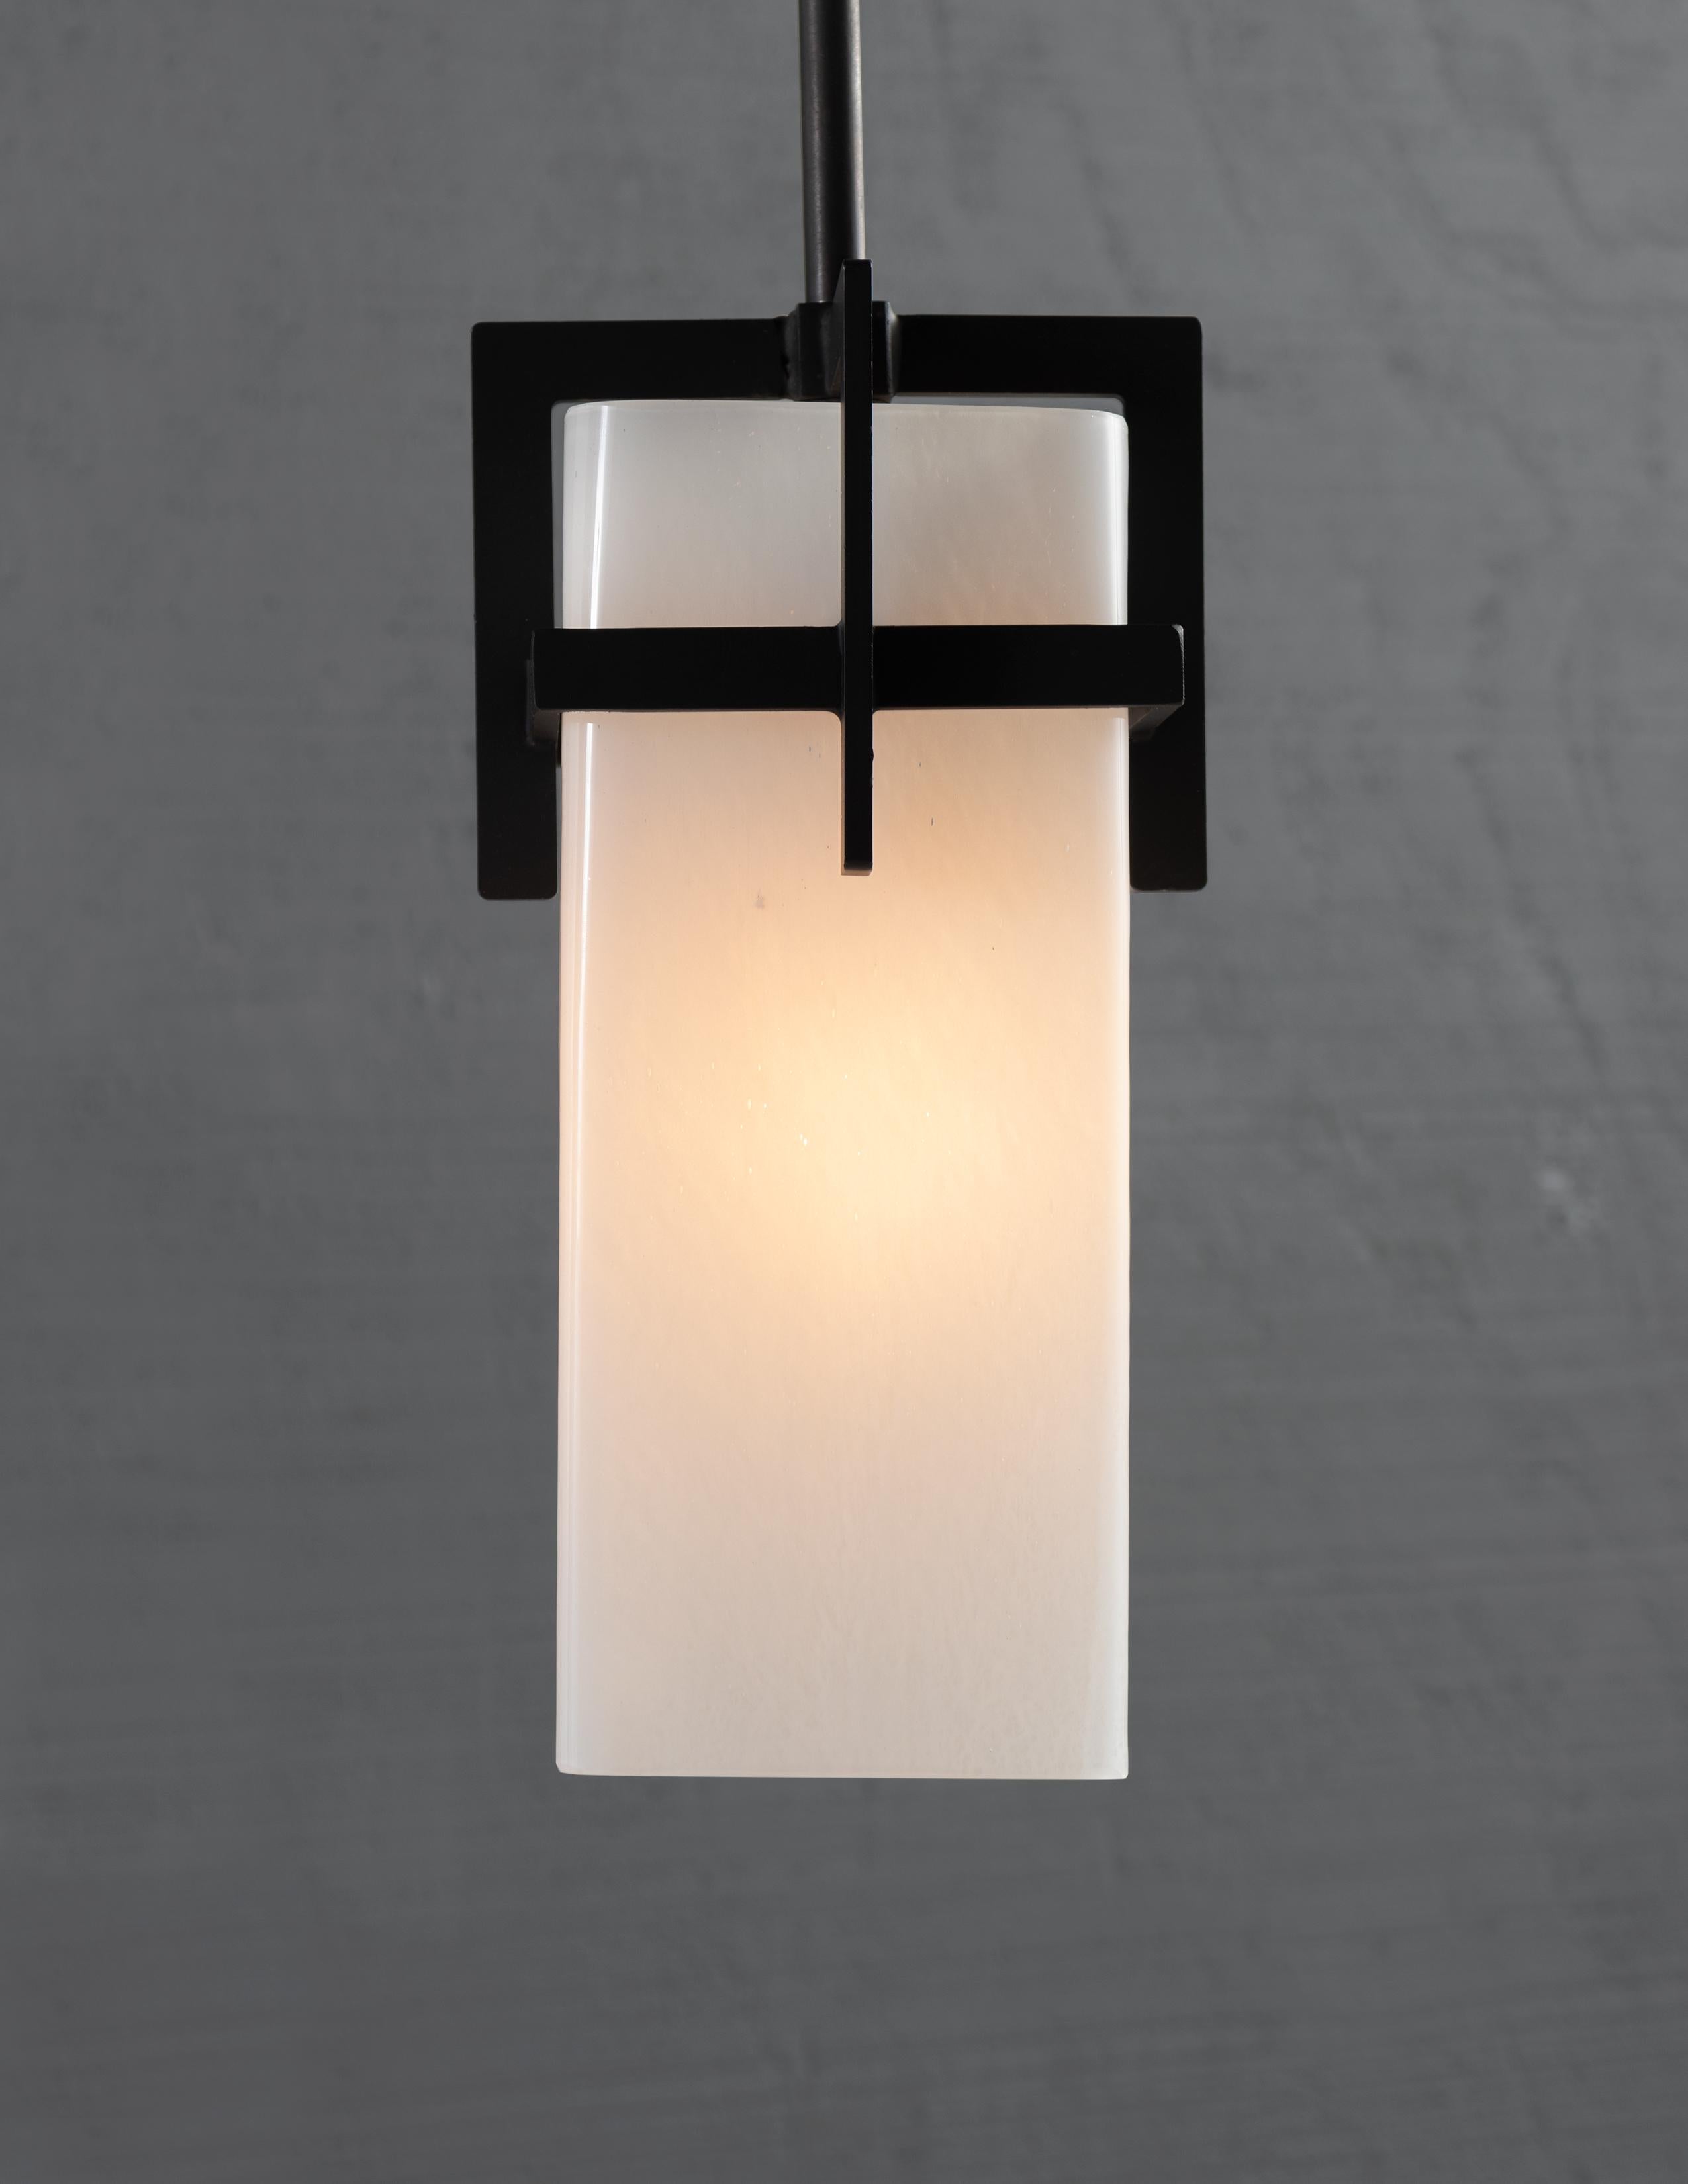 Mouth blown opaque glass with metal framing.

Bulb 1 x medium base 60 watt incandescent. 20lbs.

Handcrafted in Italy. Sold exclusively at Brendan Bass.

Minimum hanging height: N/A
Maximum hanging height: 71